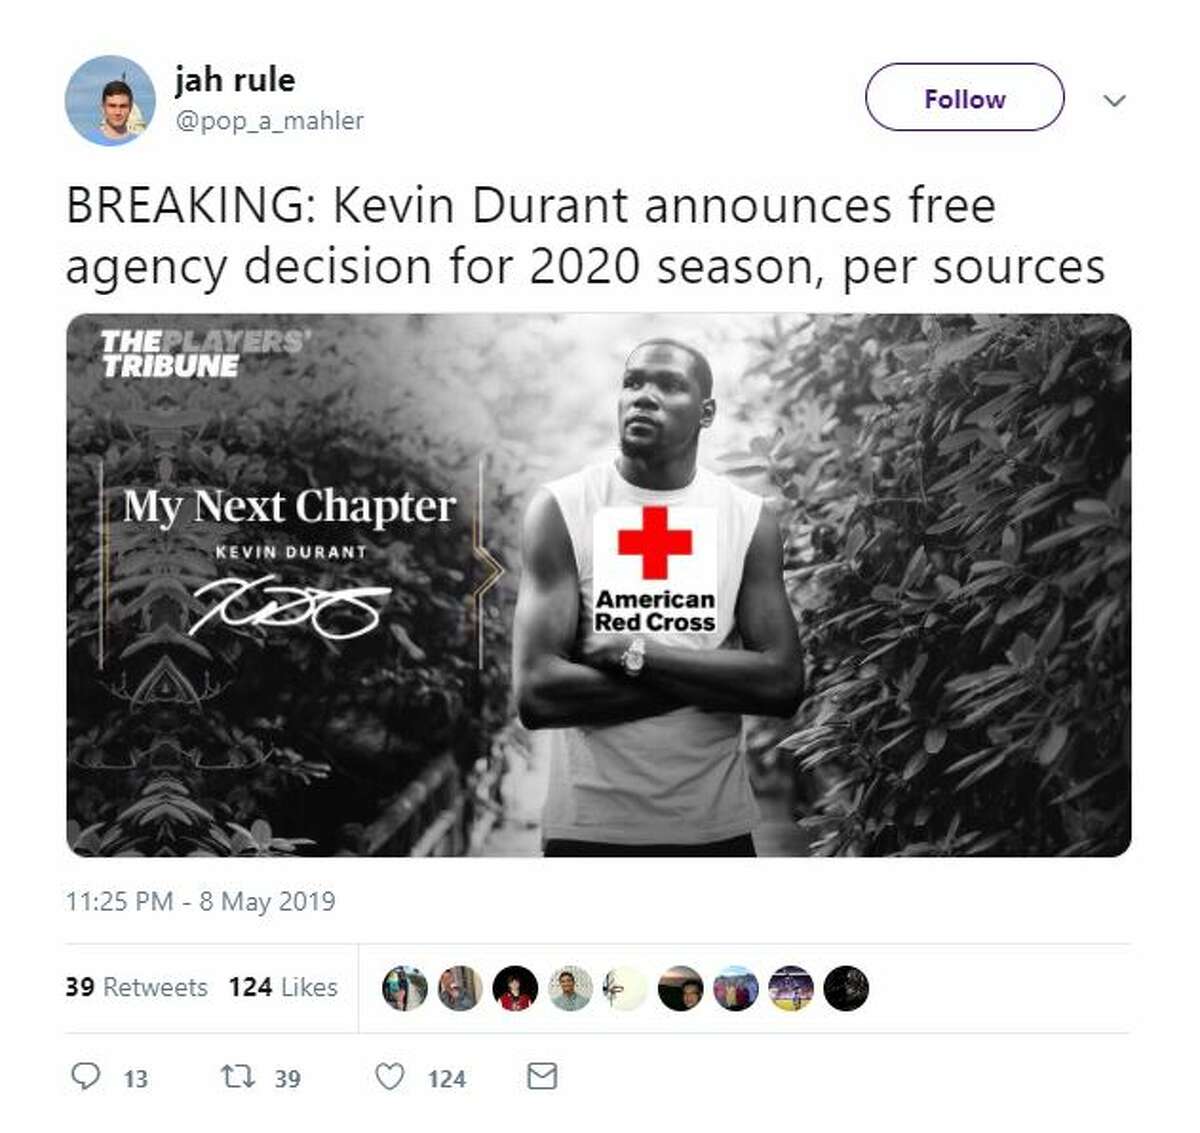 The Internet came alive when the Warriors Kevin Durant went down with a non-contact injury during a game against the Rockets on Wednesday, May 9, 2019.